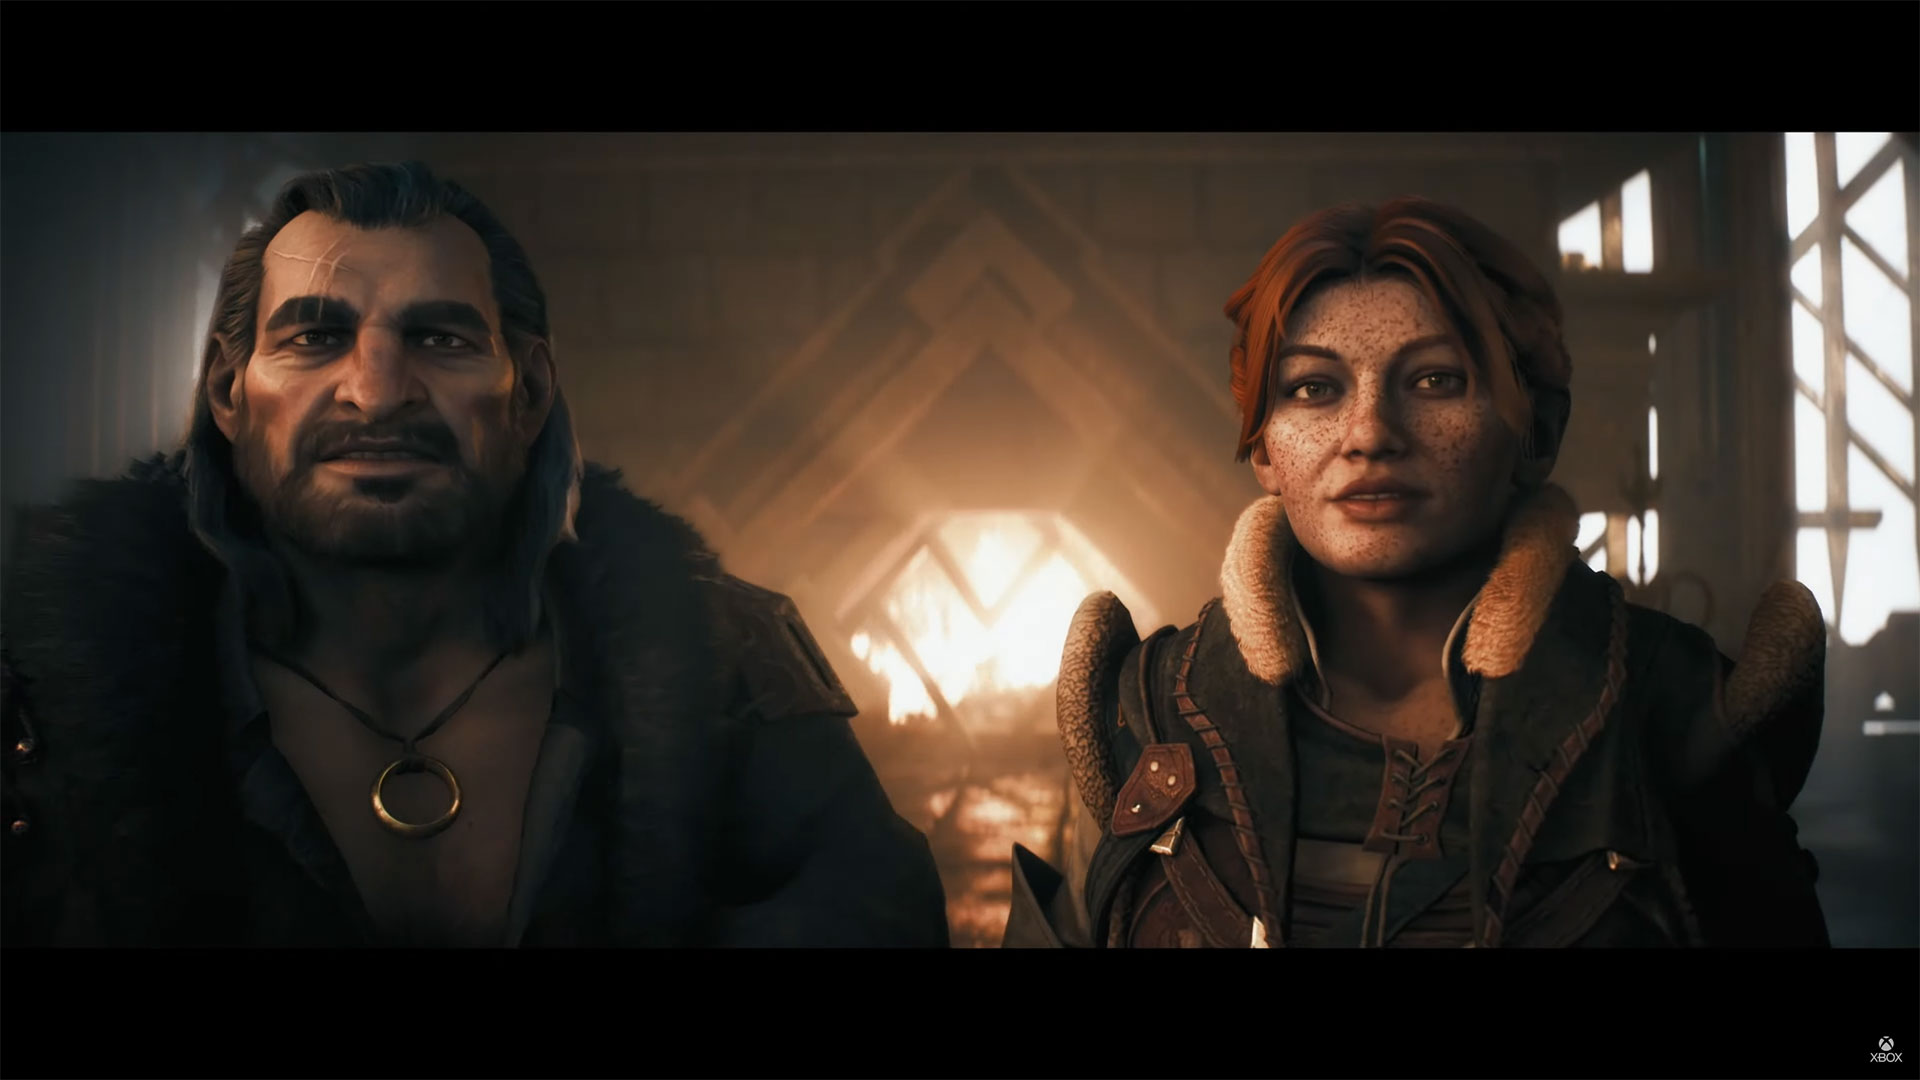 Dragon Age: The Veilguard shared its official reveal trailer today